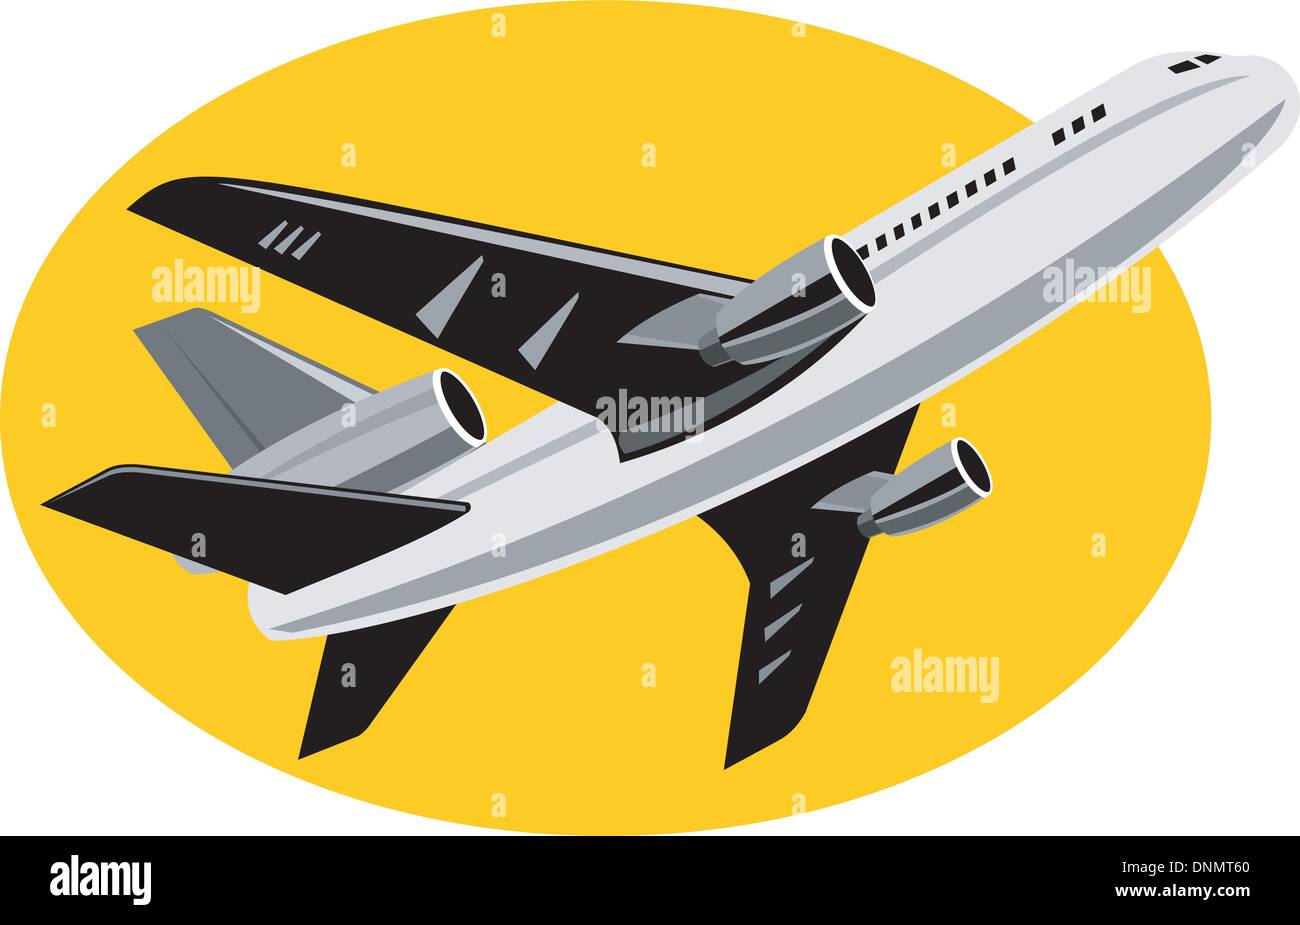 illustration of a commercial jet plane airliner on flight flying taking off isolated background Stock Vector